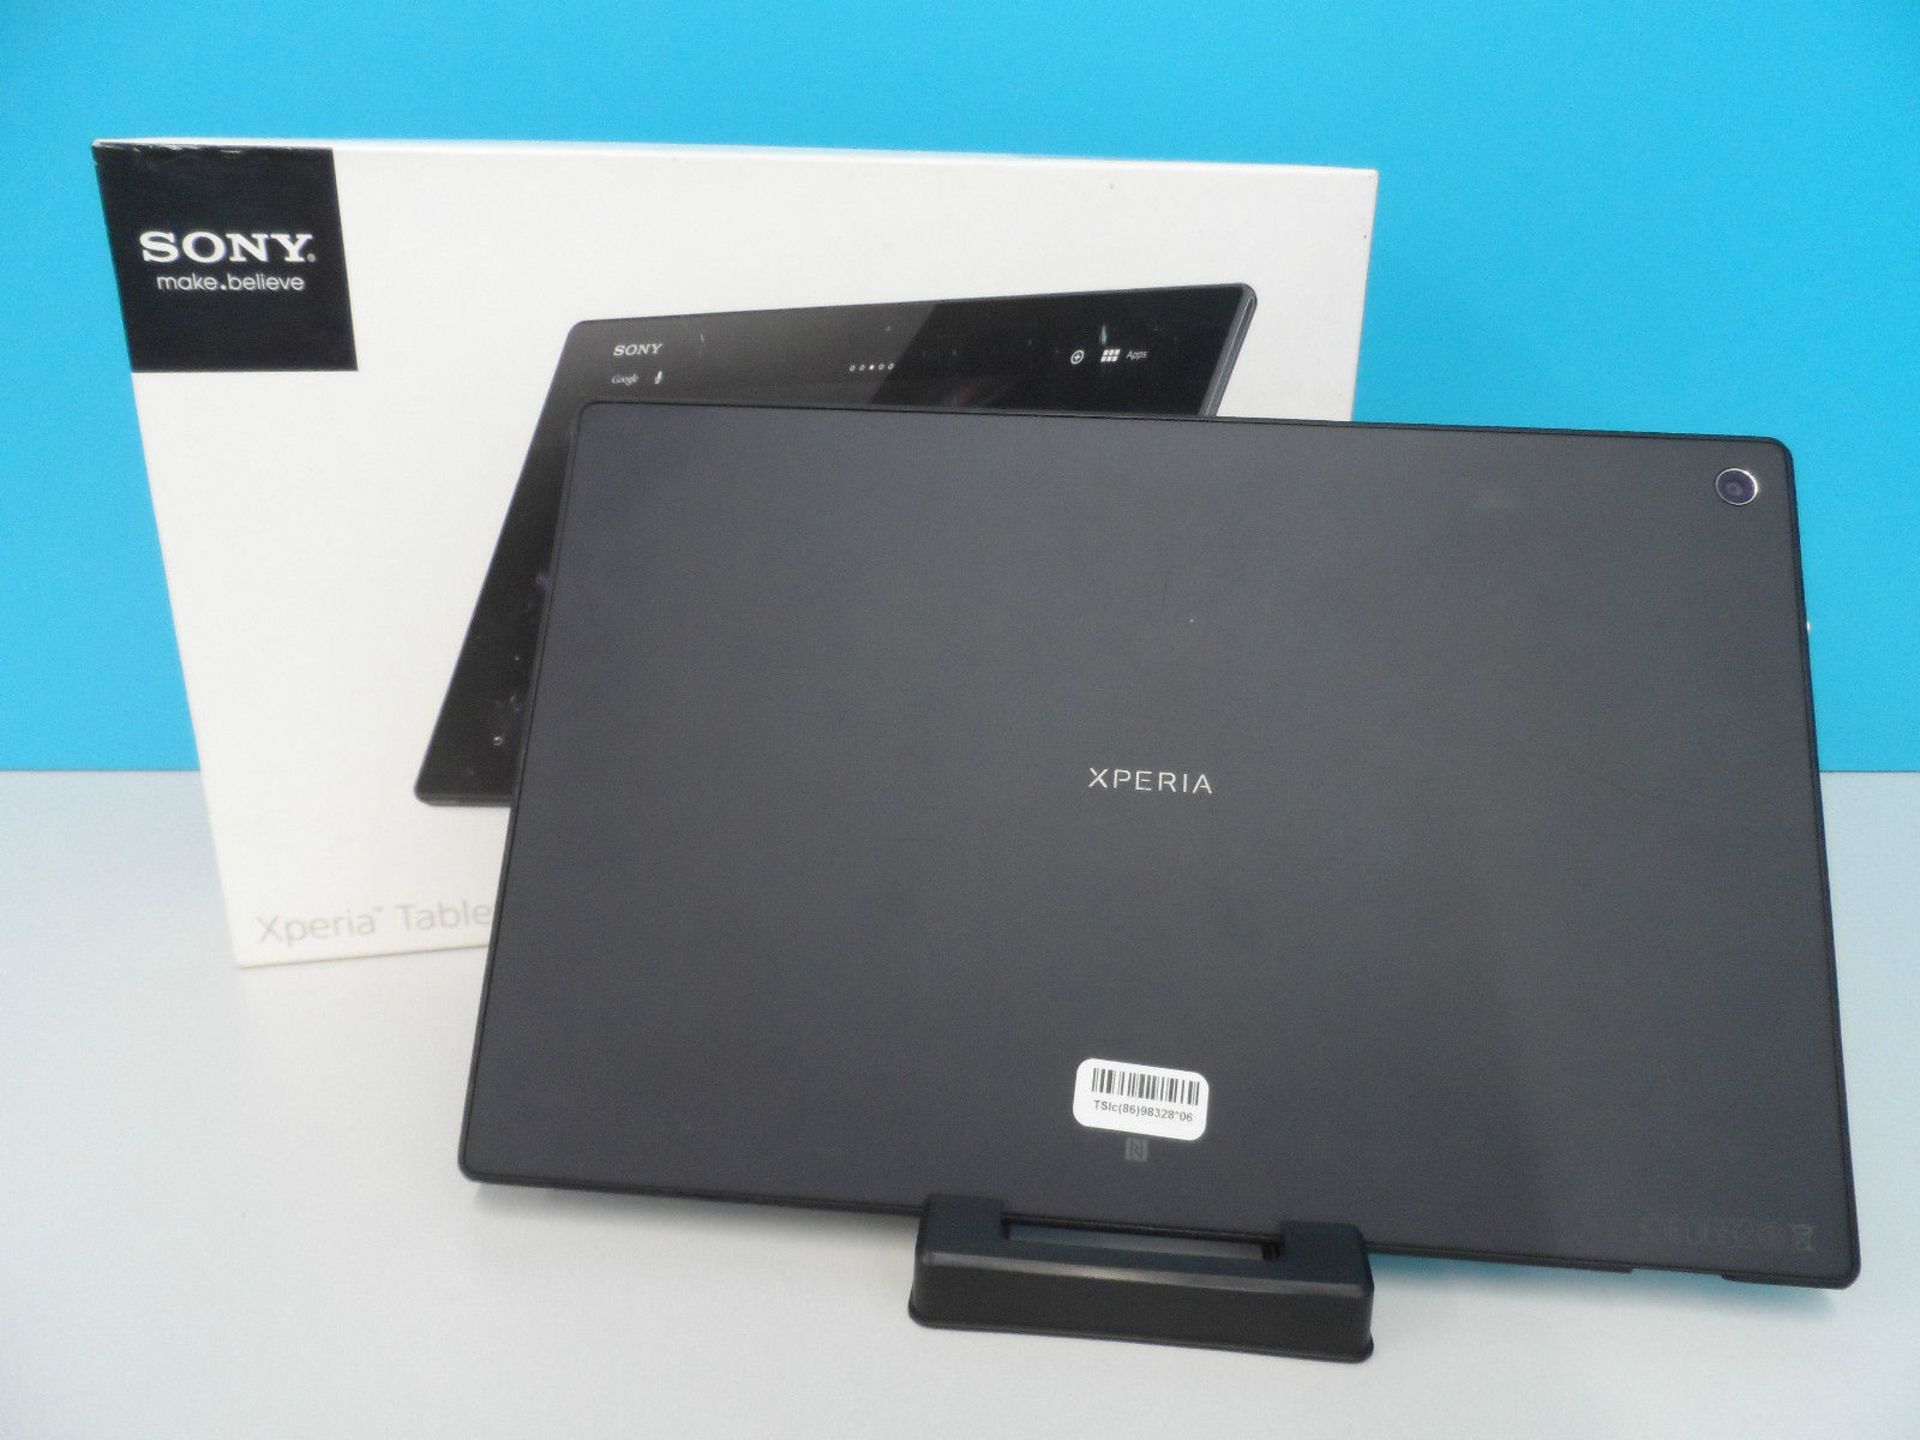 SONY XPERIA TABLET Z - 16GB WIFI & 4G LTE, LOCKED TO 02/GIFFGAFF *NO VAT* - Image 3 of 5